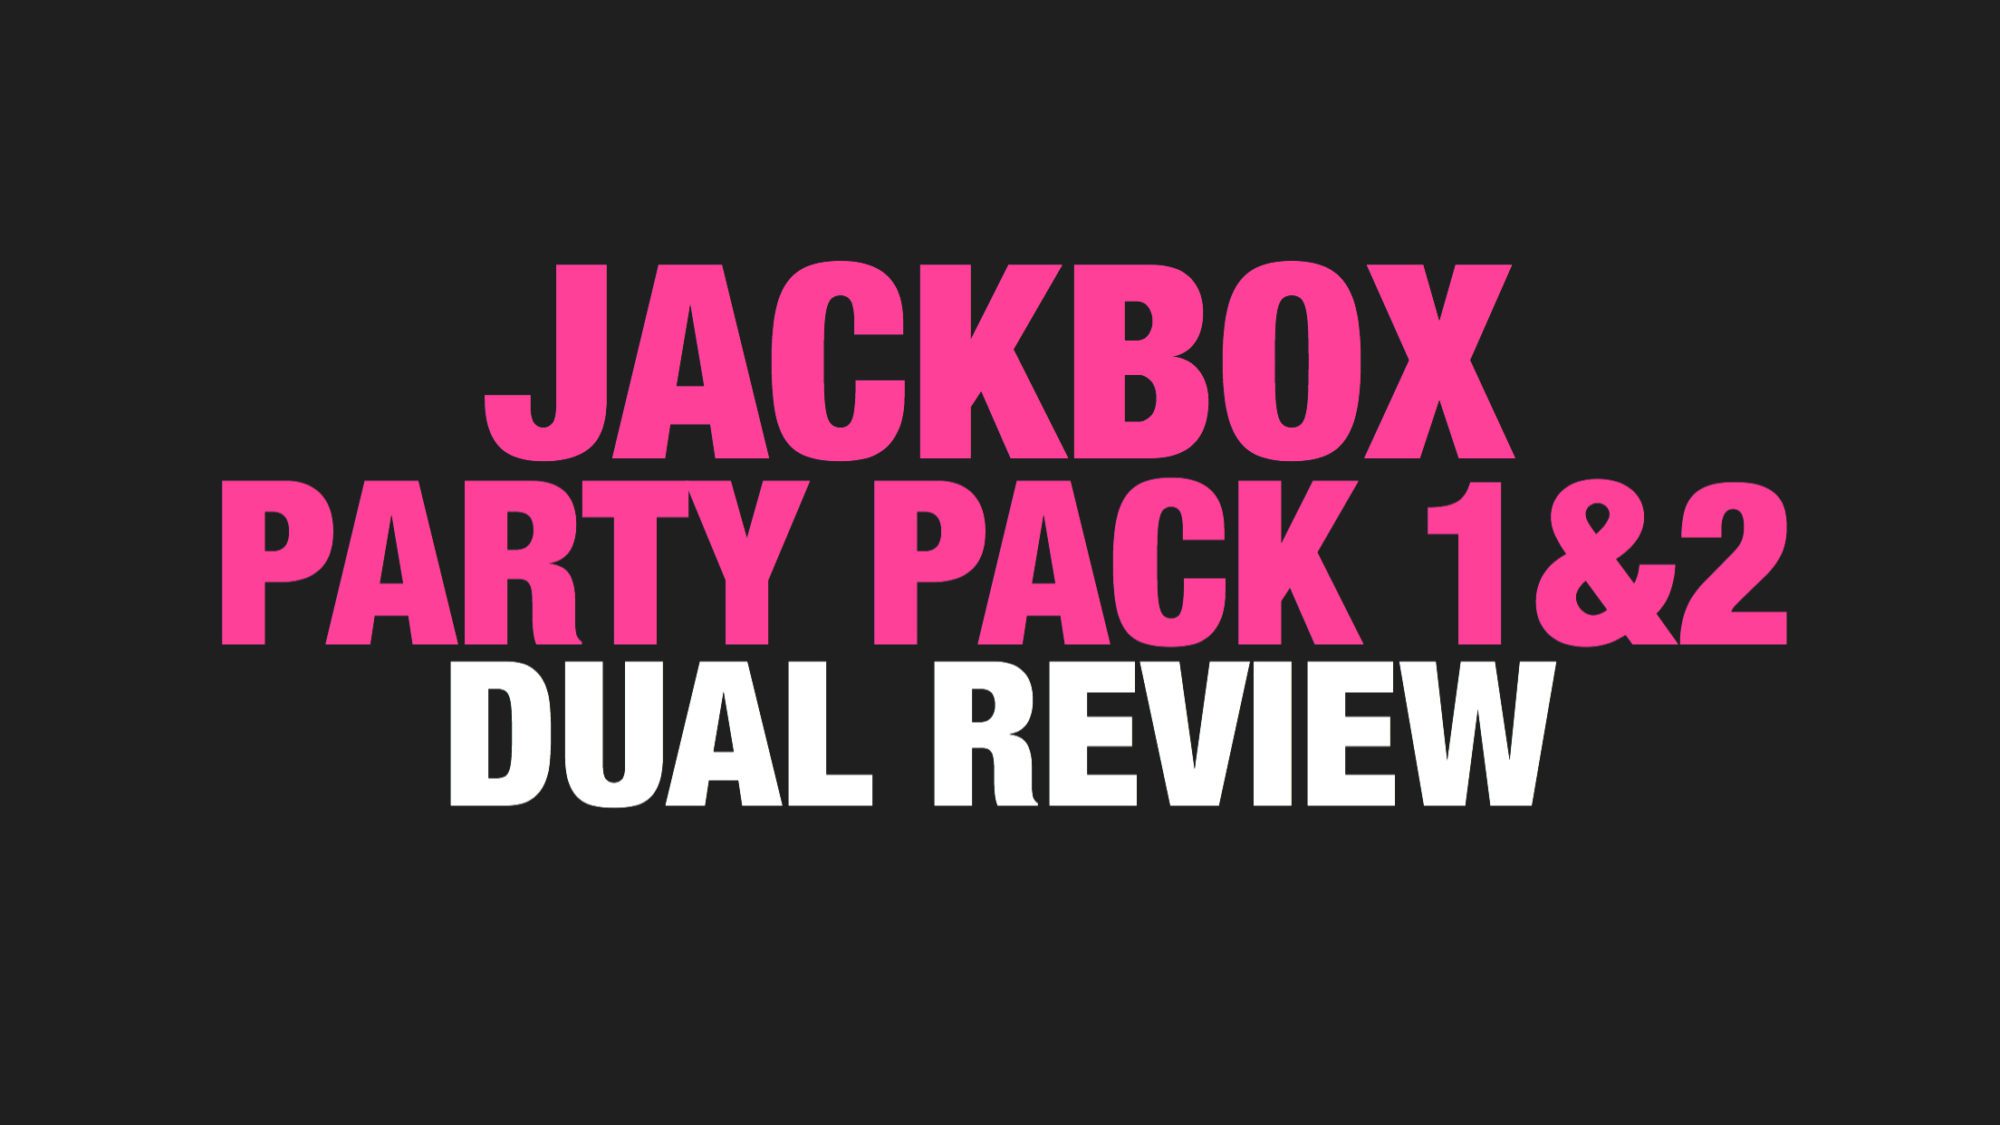 ‘Jackbox Party Pack 1 & 2’ DUAL Review